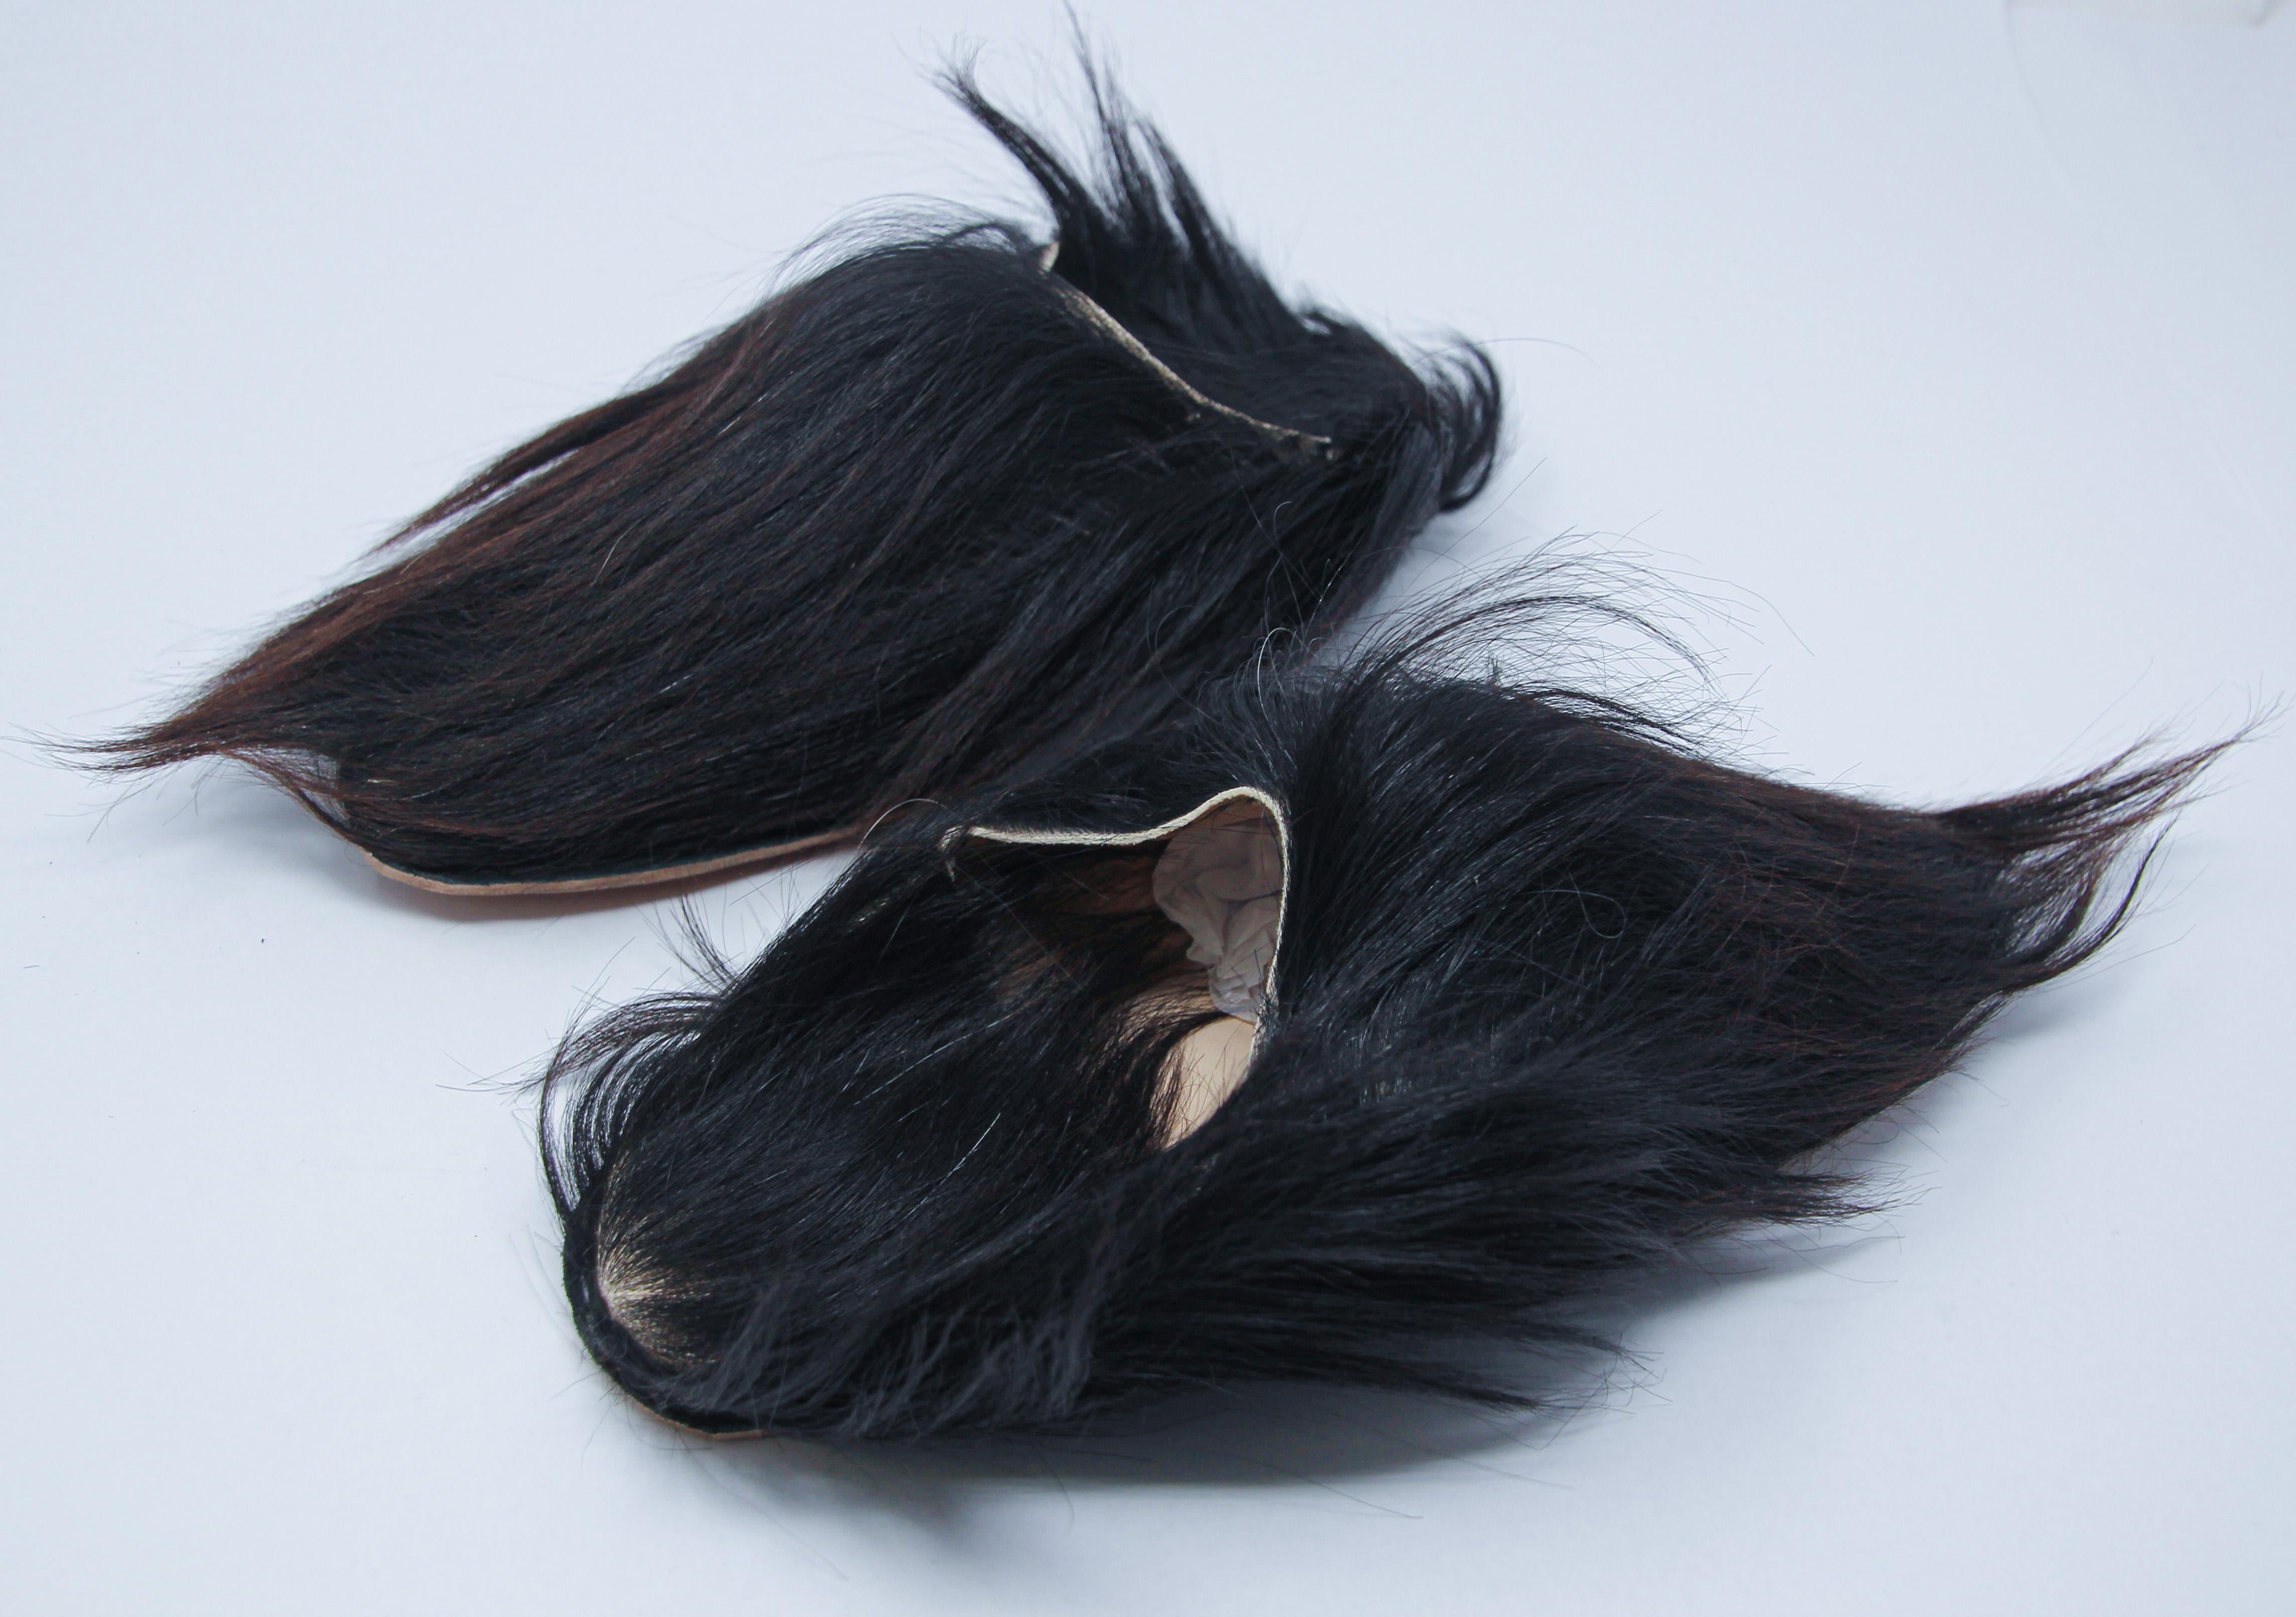 Handmade Moroccan goat hair fur babouche slippers.
Fabulous handstitched slippers made in Marrakech from natural long goats hair leather sole with elongated toe.
Moroccan leather slippers are handmade to perfection the inside sole is crafted of